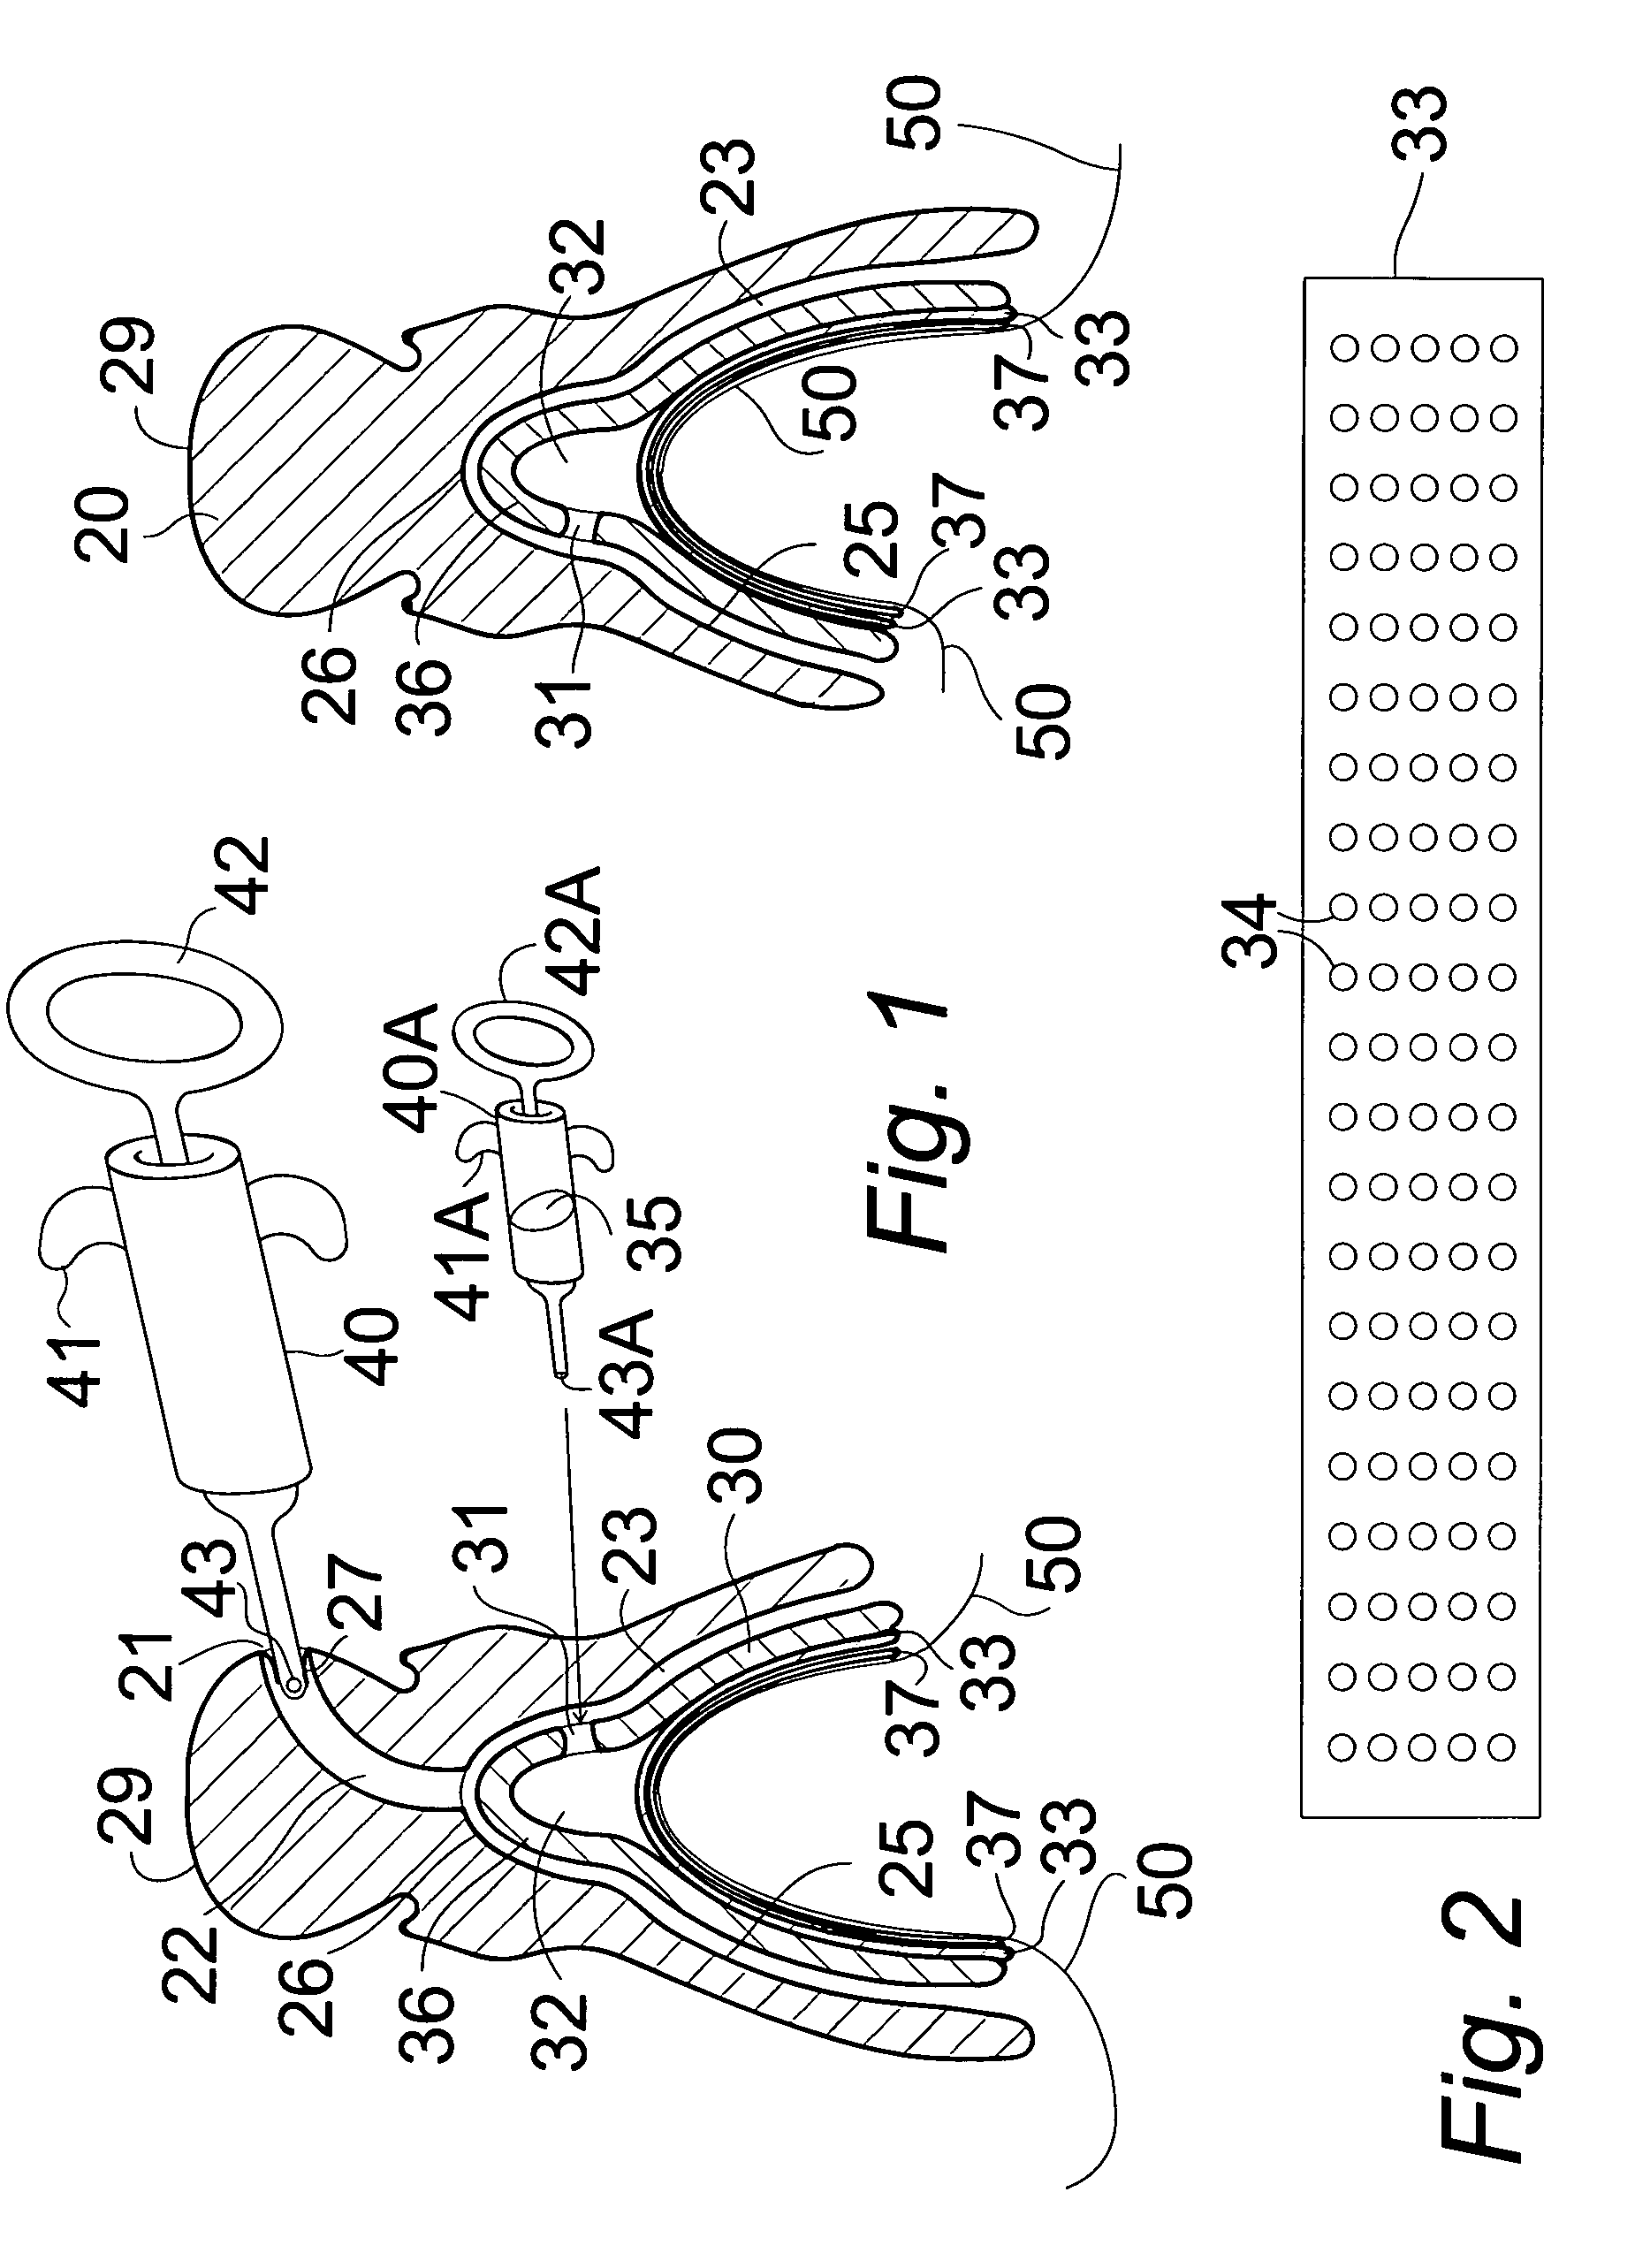 Vacuum-seated dentures with skin contacting plate